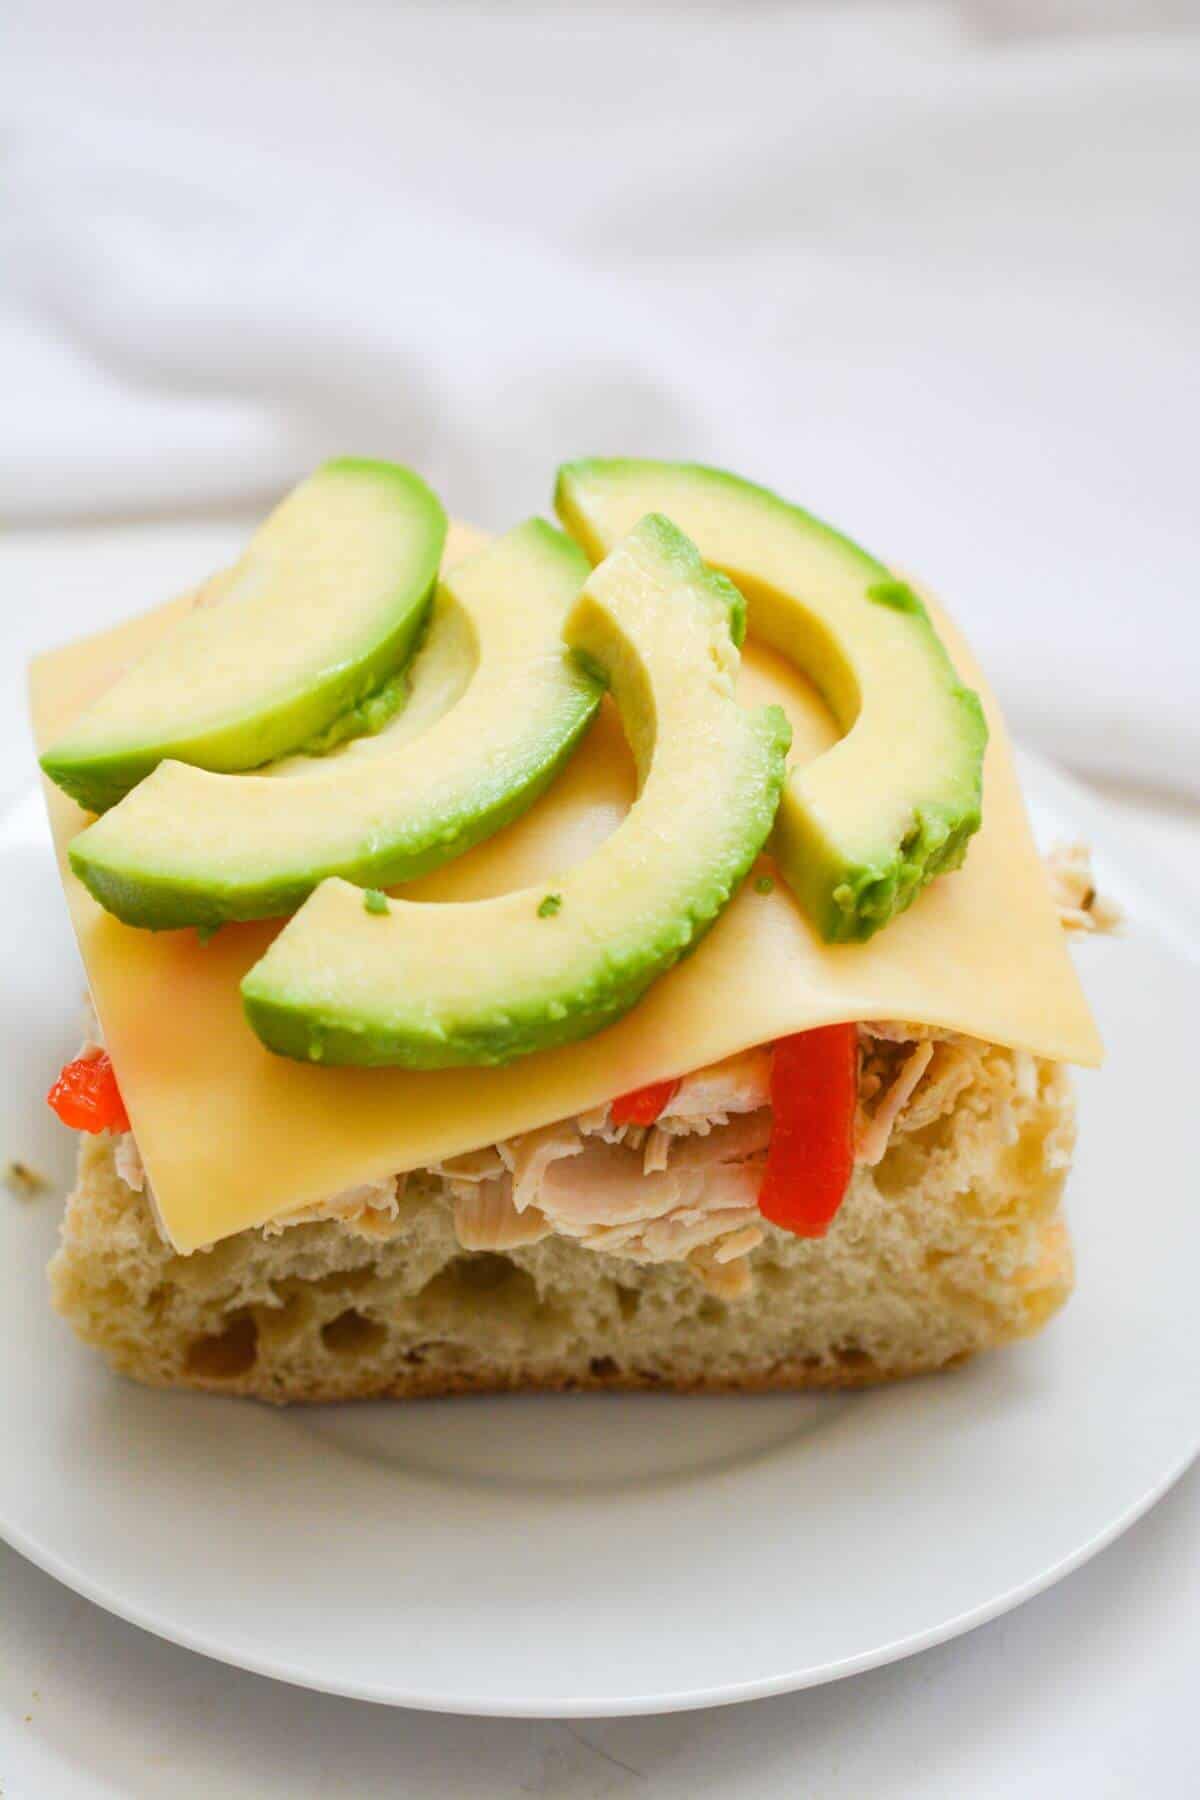 Slice of gouda cheese and sliced avocado added to sandwich.